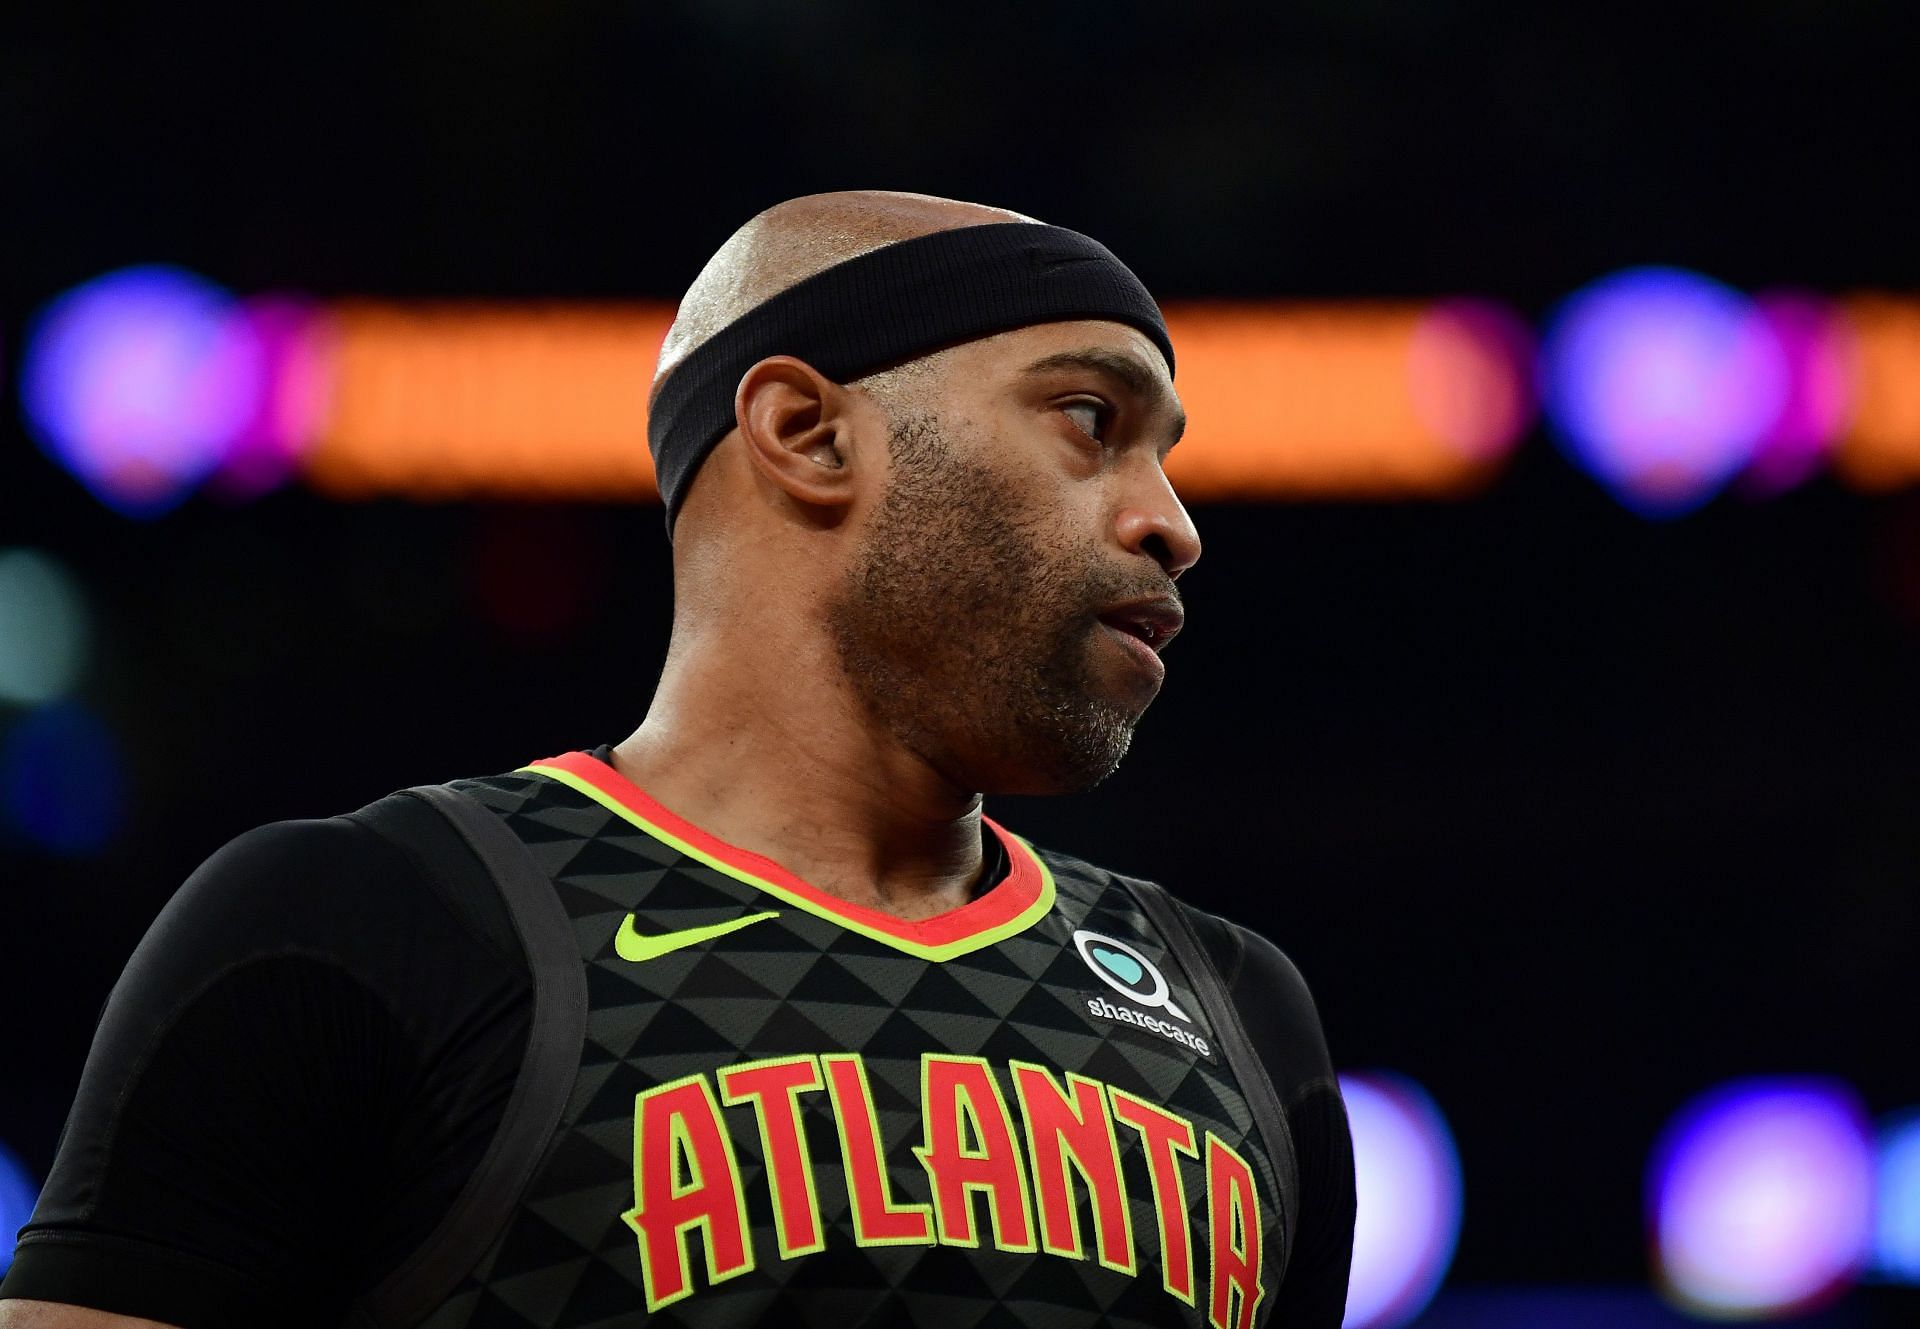 NBA Legend Vince Carter during his time with the Atlanta Hawks